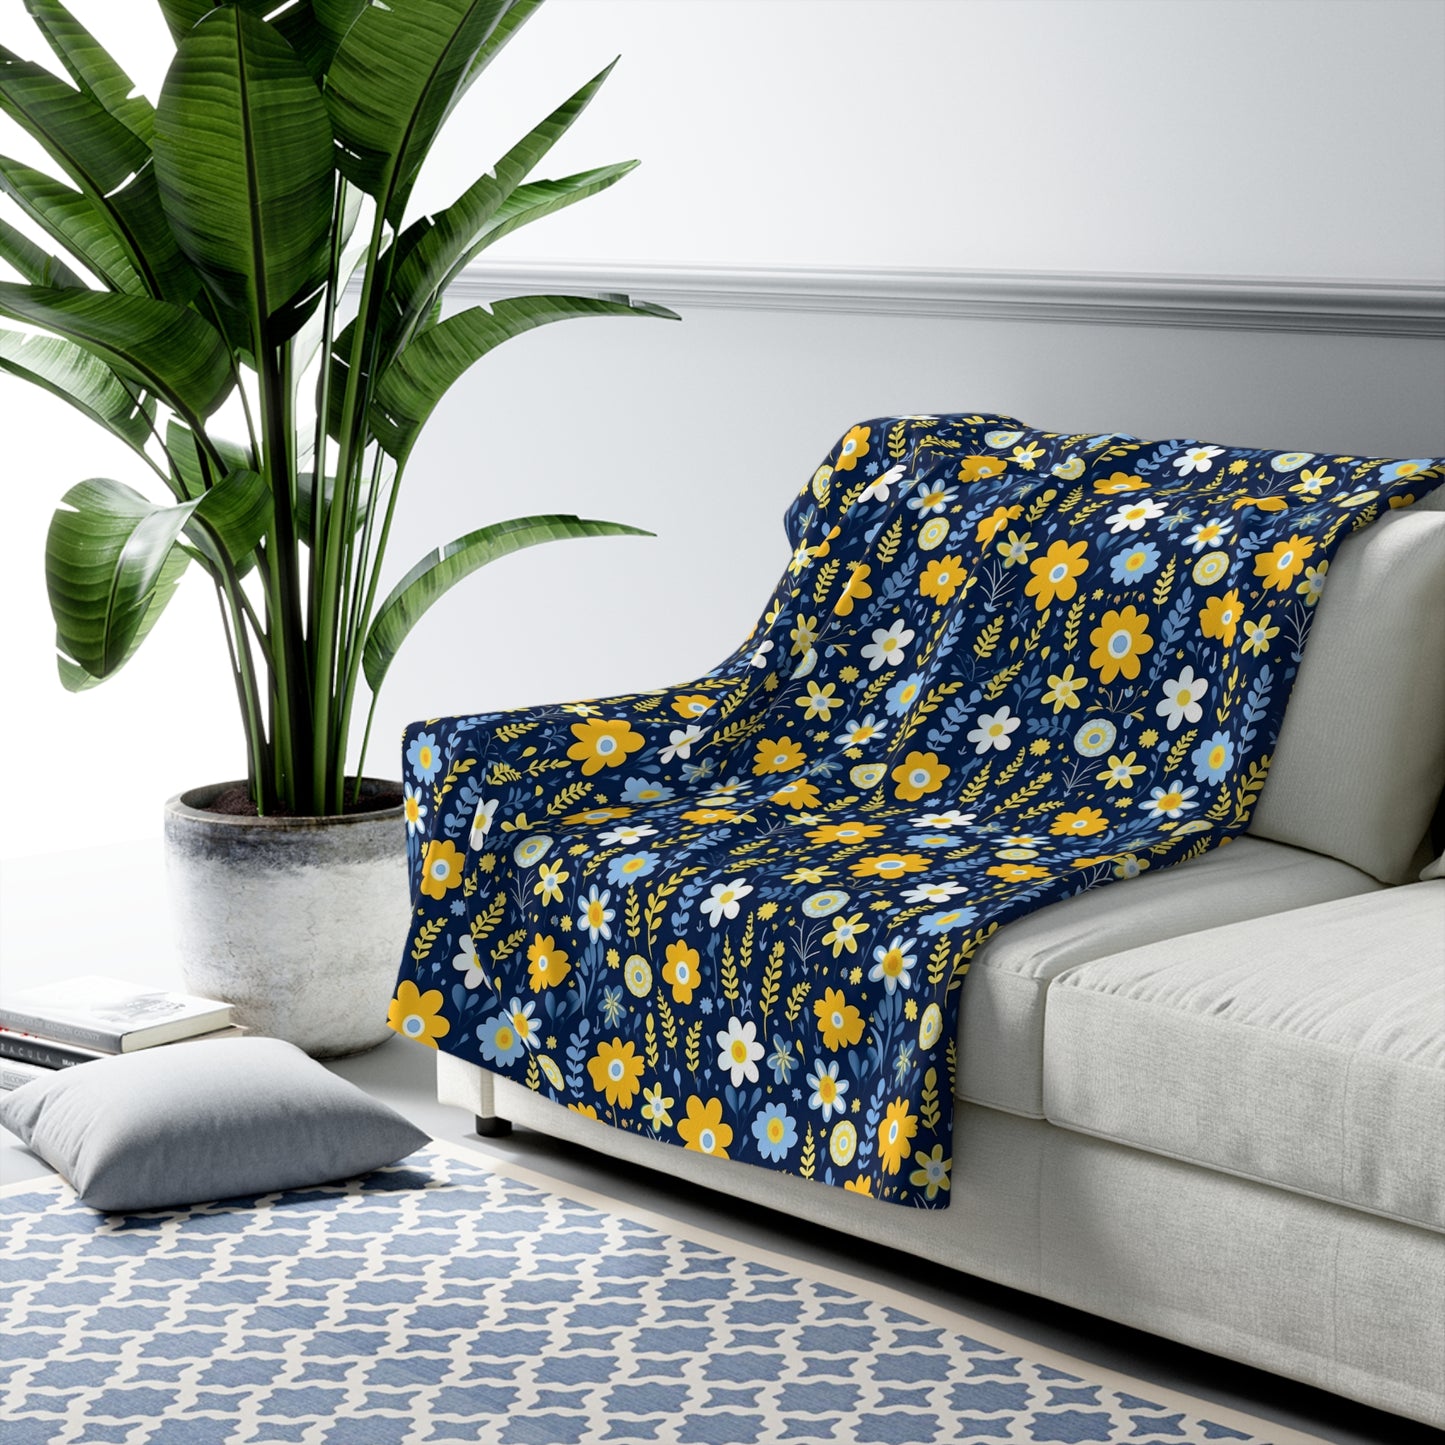 Watercolor Floral Sherpa Blanket - Blue and Yellow Floral Sherpa Blanket